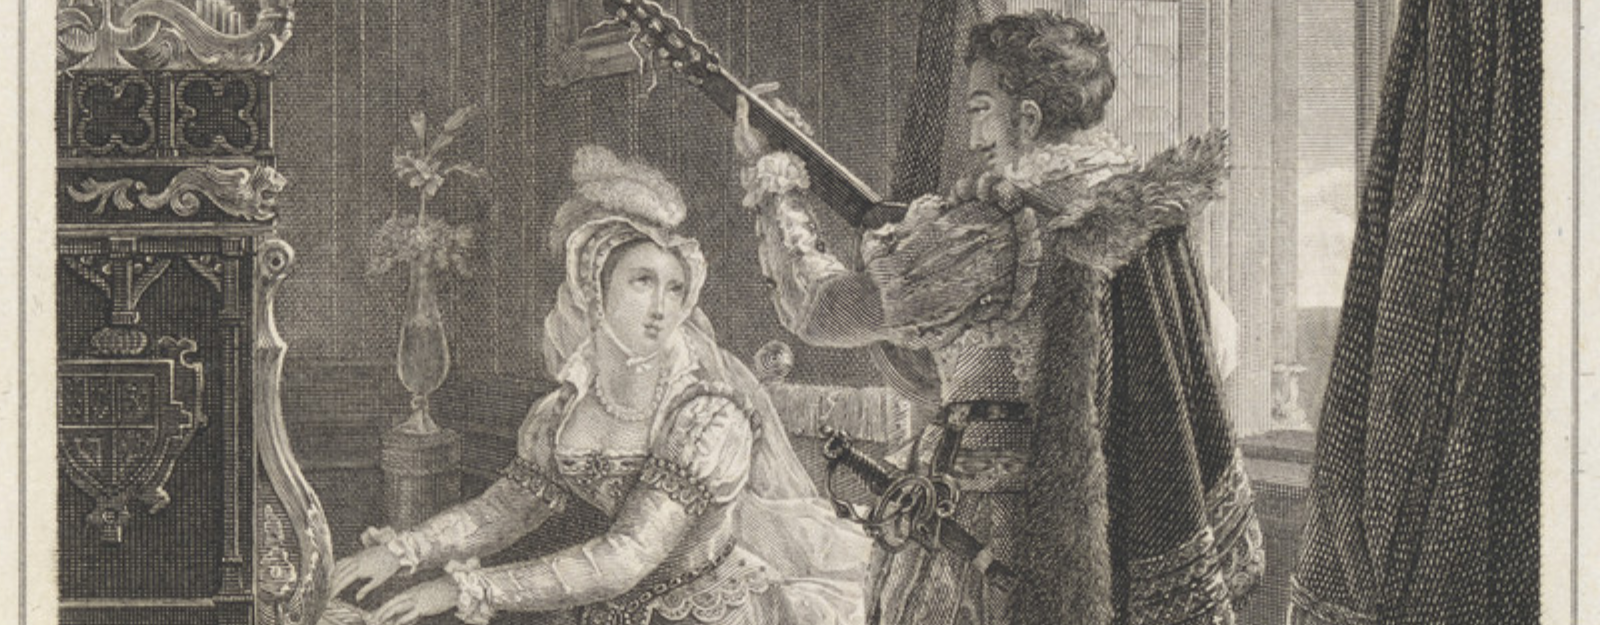 Drawing of Mary, Queen of Scots and courtier playing music